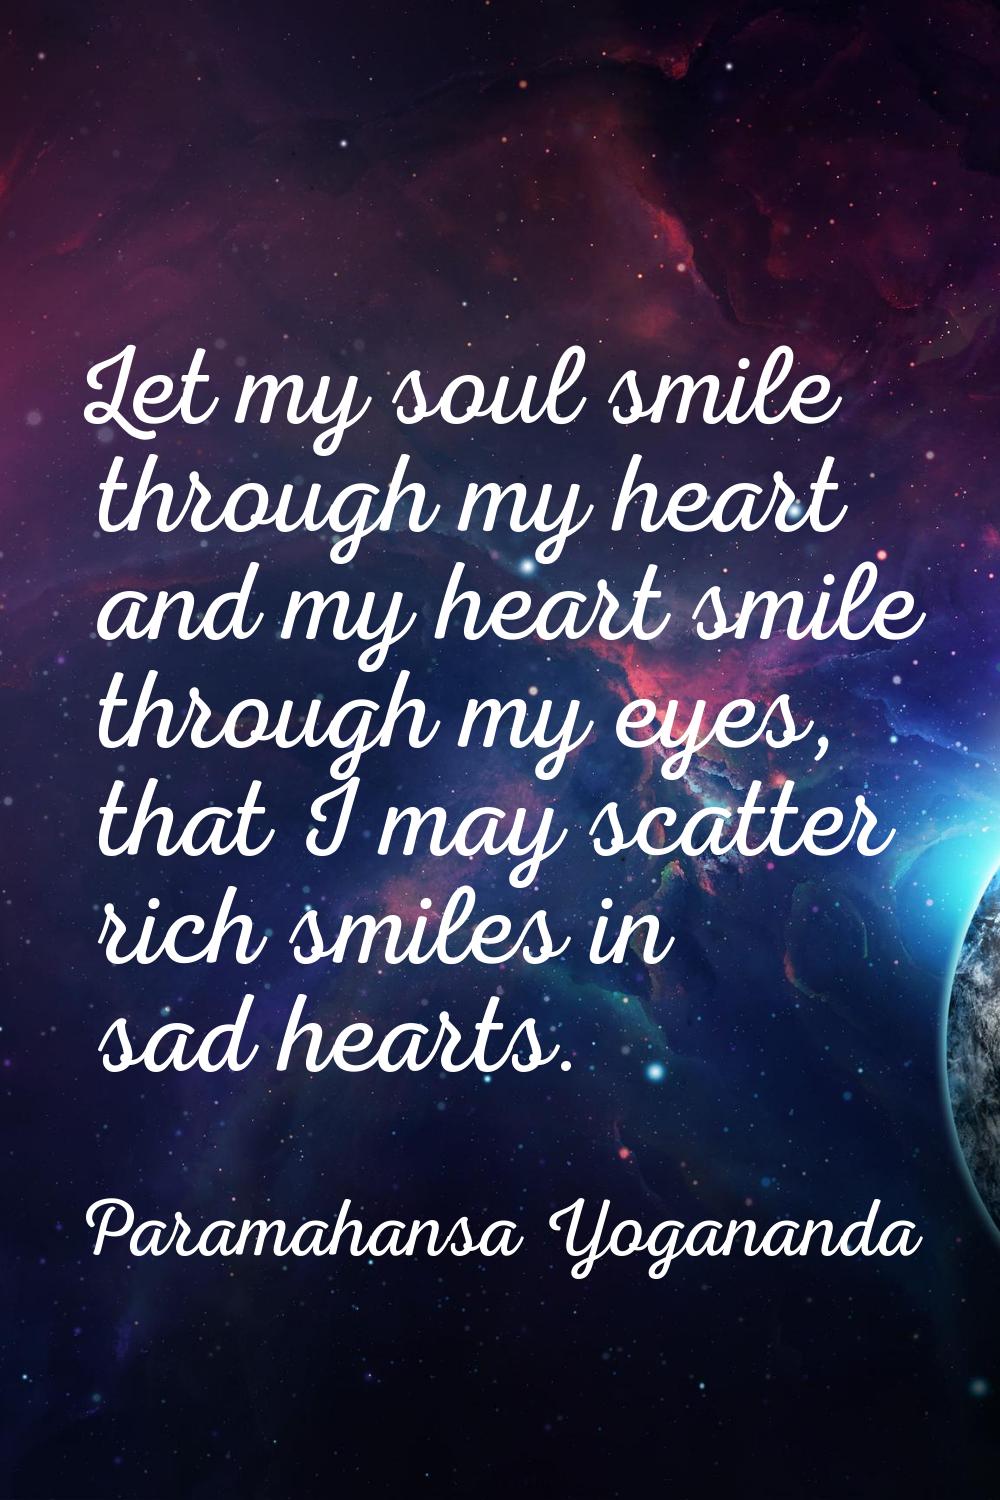 Let my soul smile through my heart and my heart smile through my eyes, that I may scatter rich smil